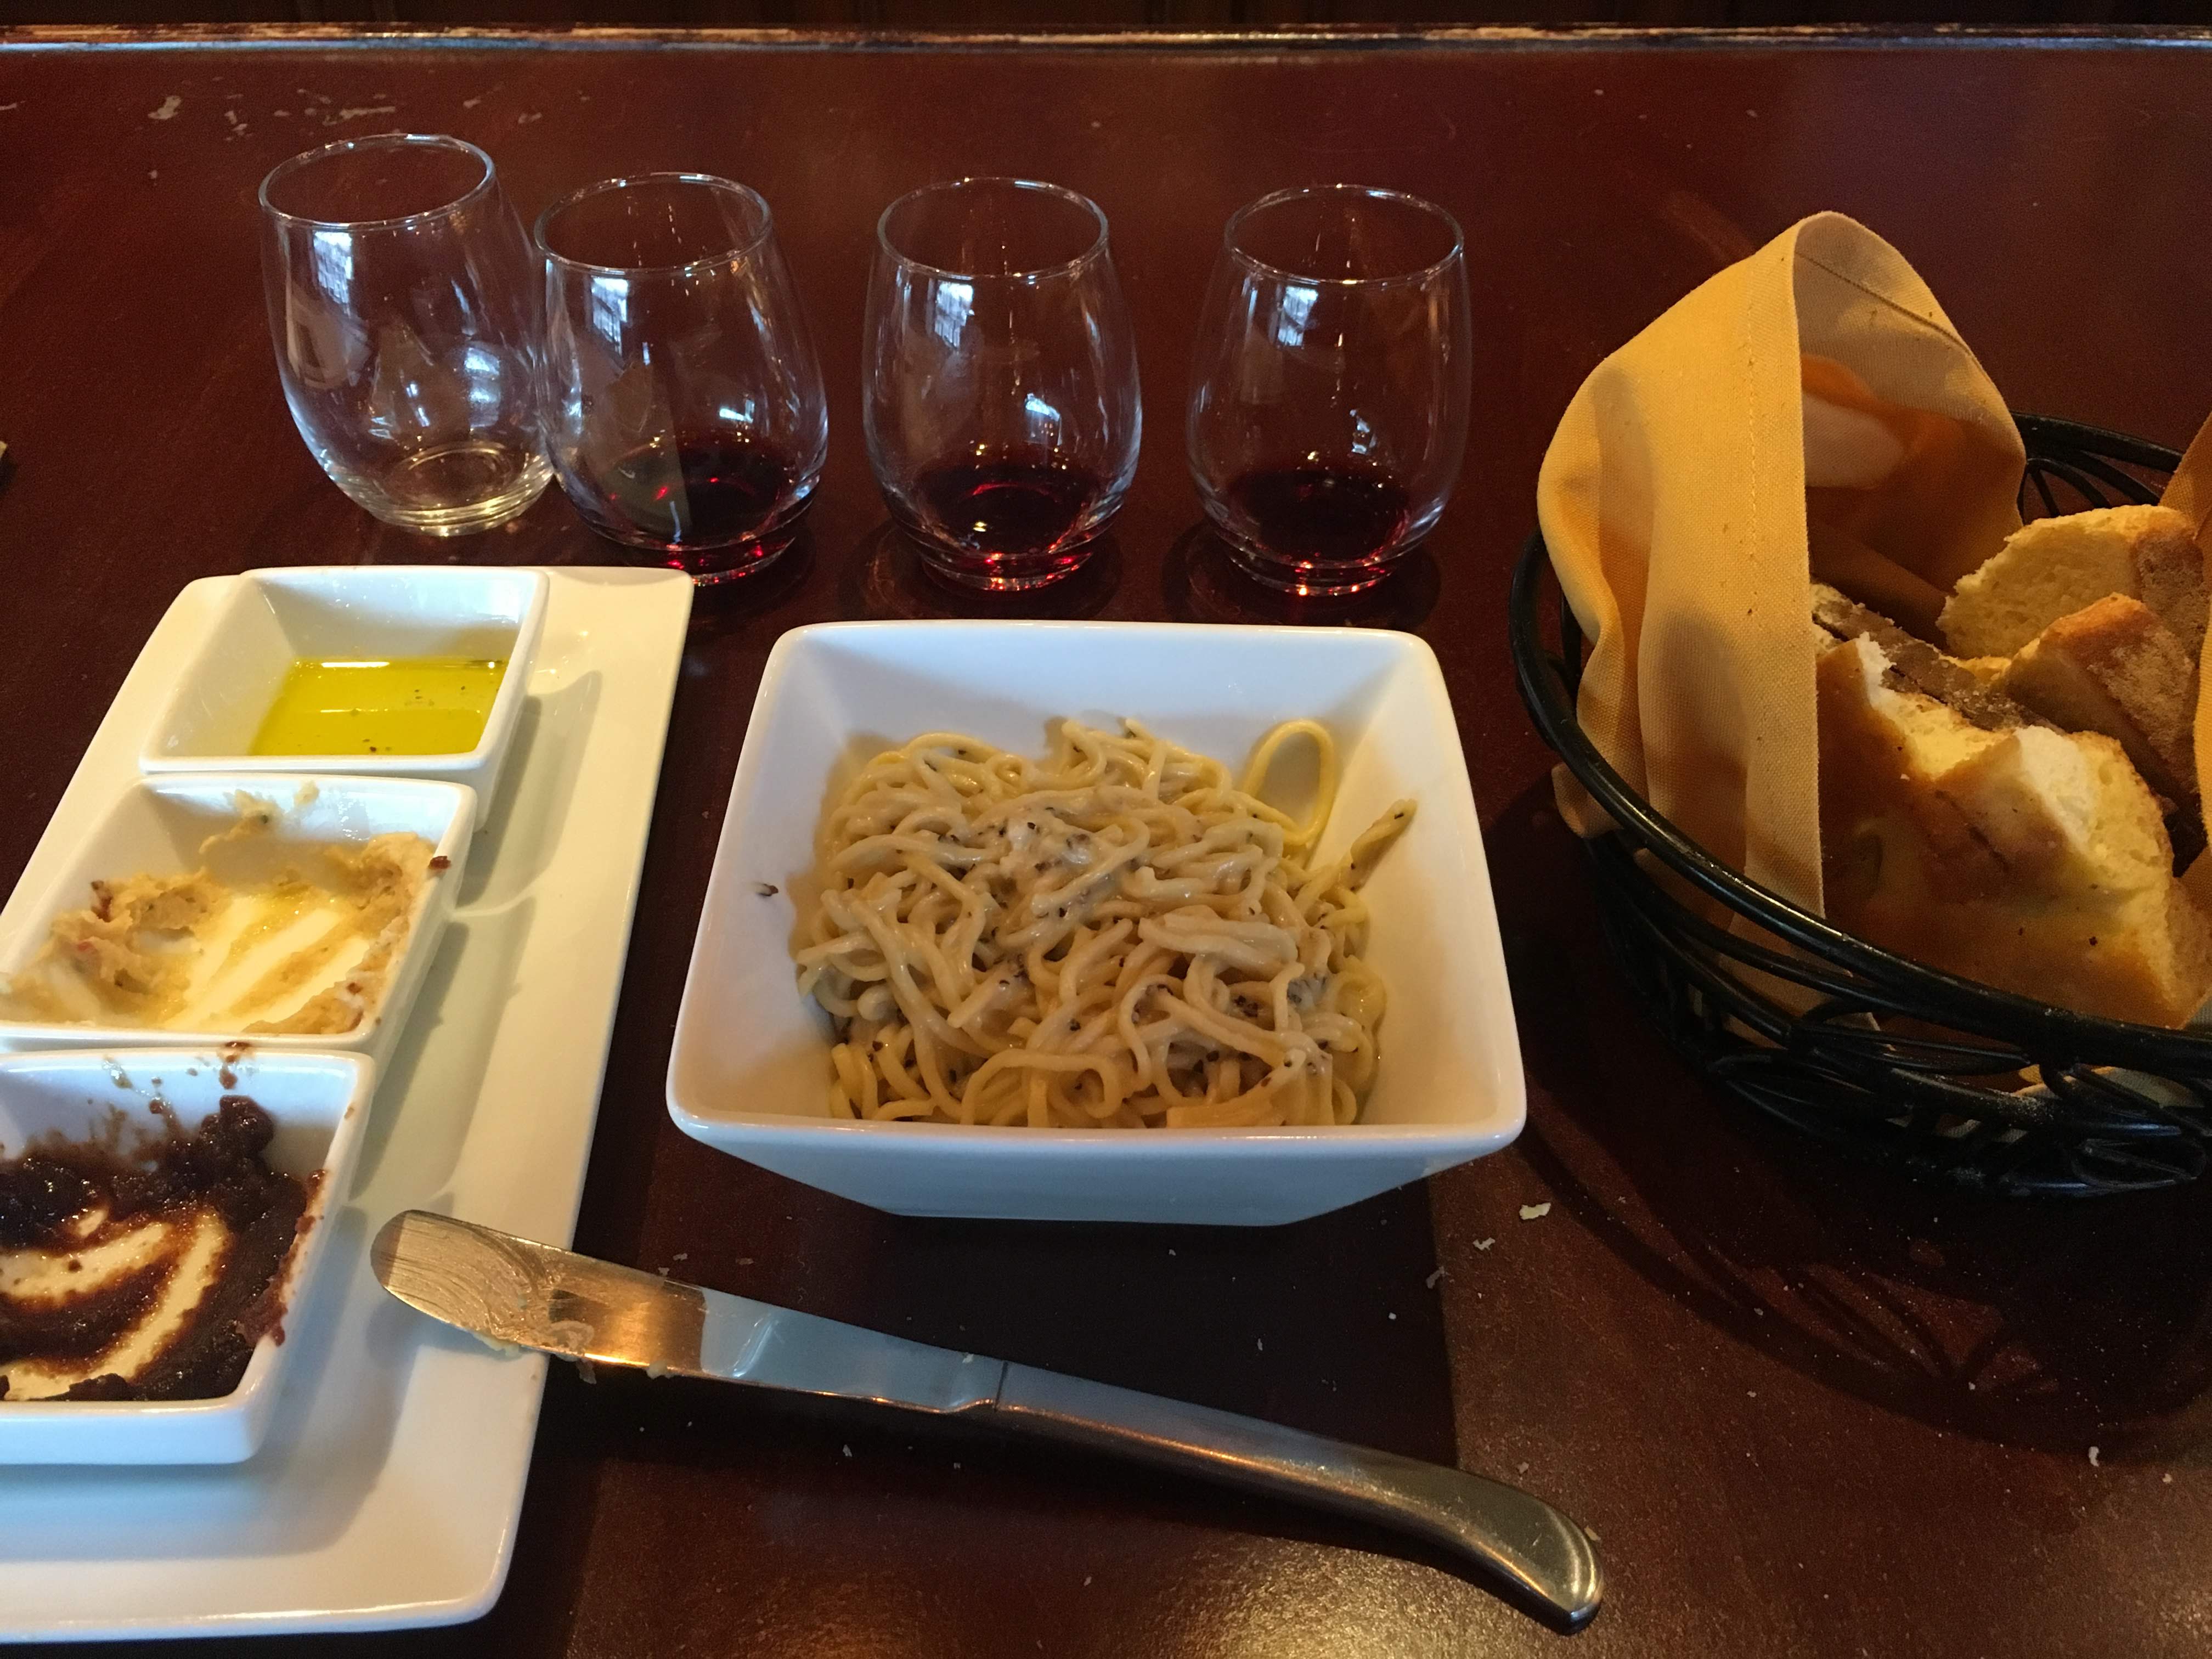 Maynard’s wine bar with freshly made pasta and bread